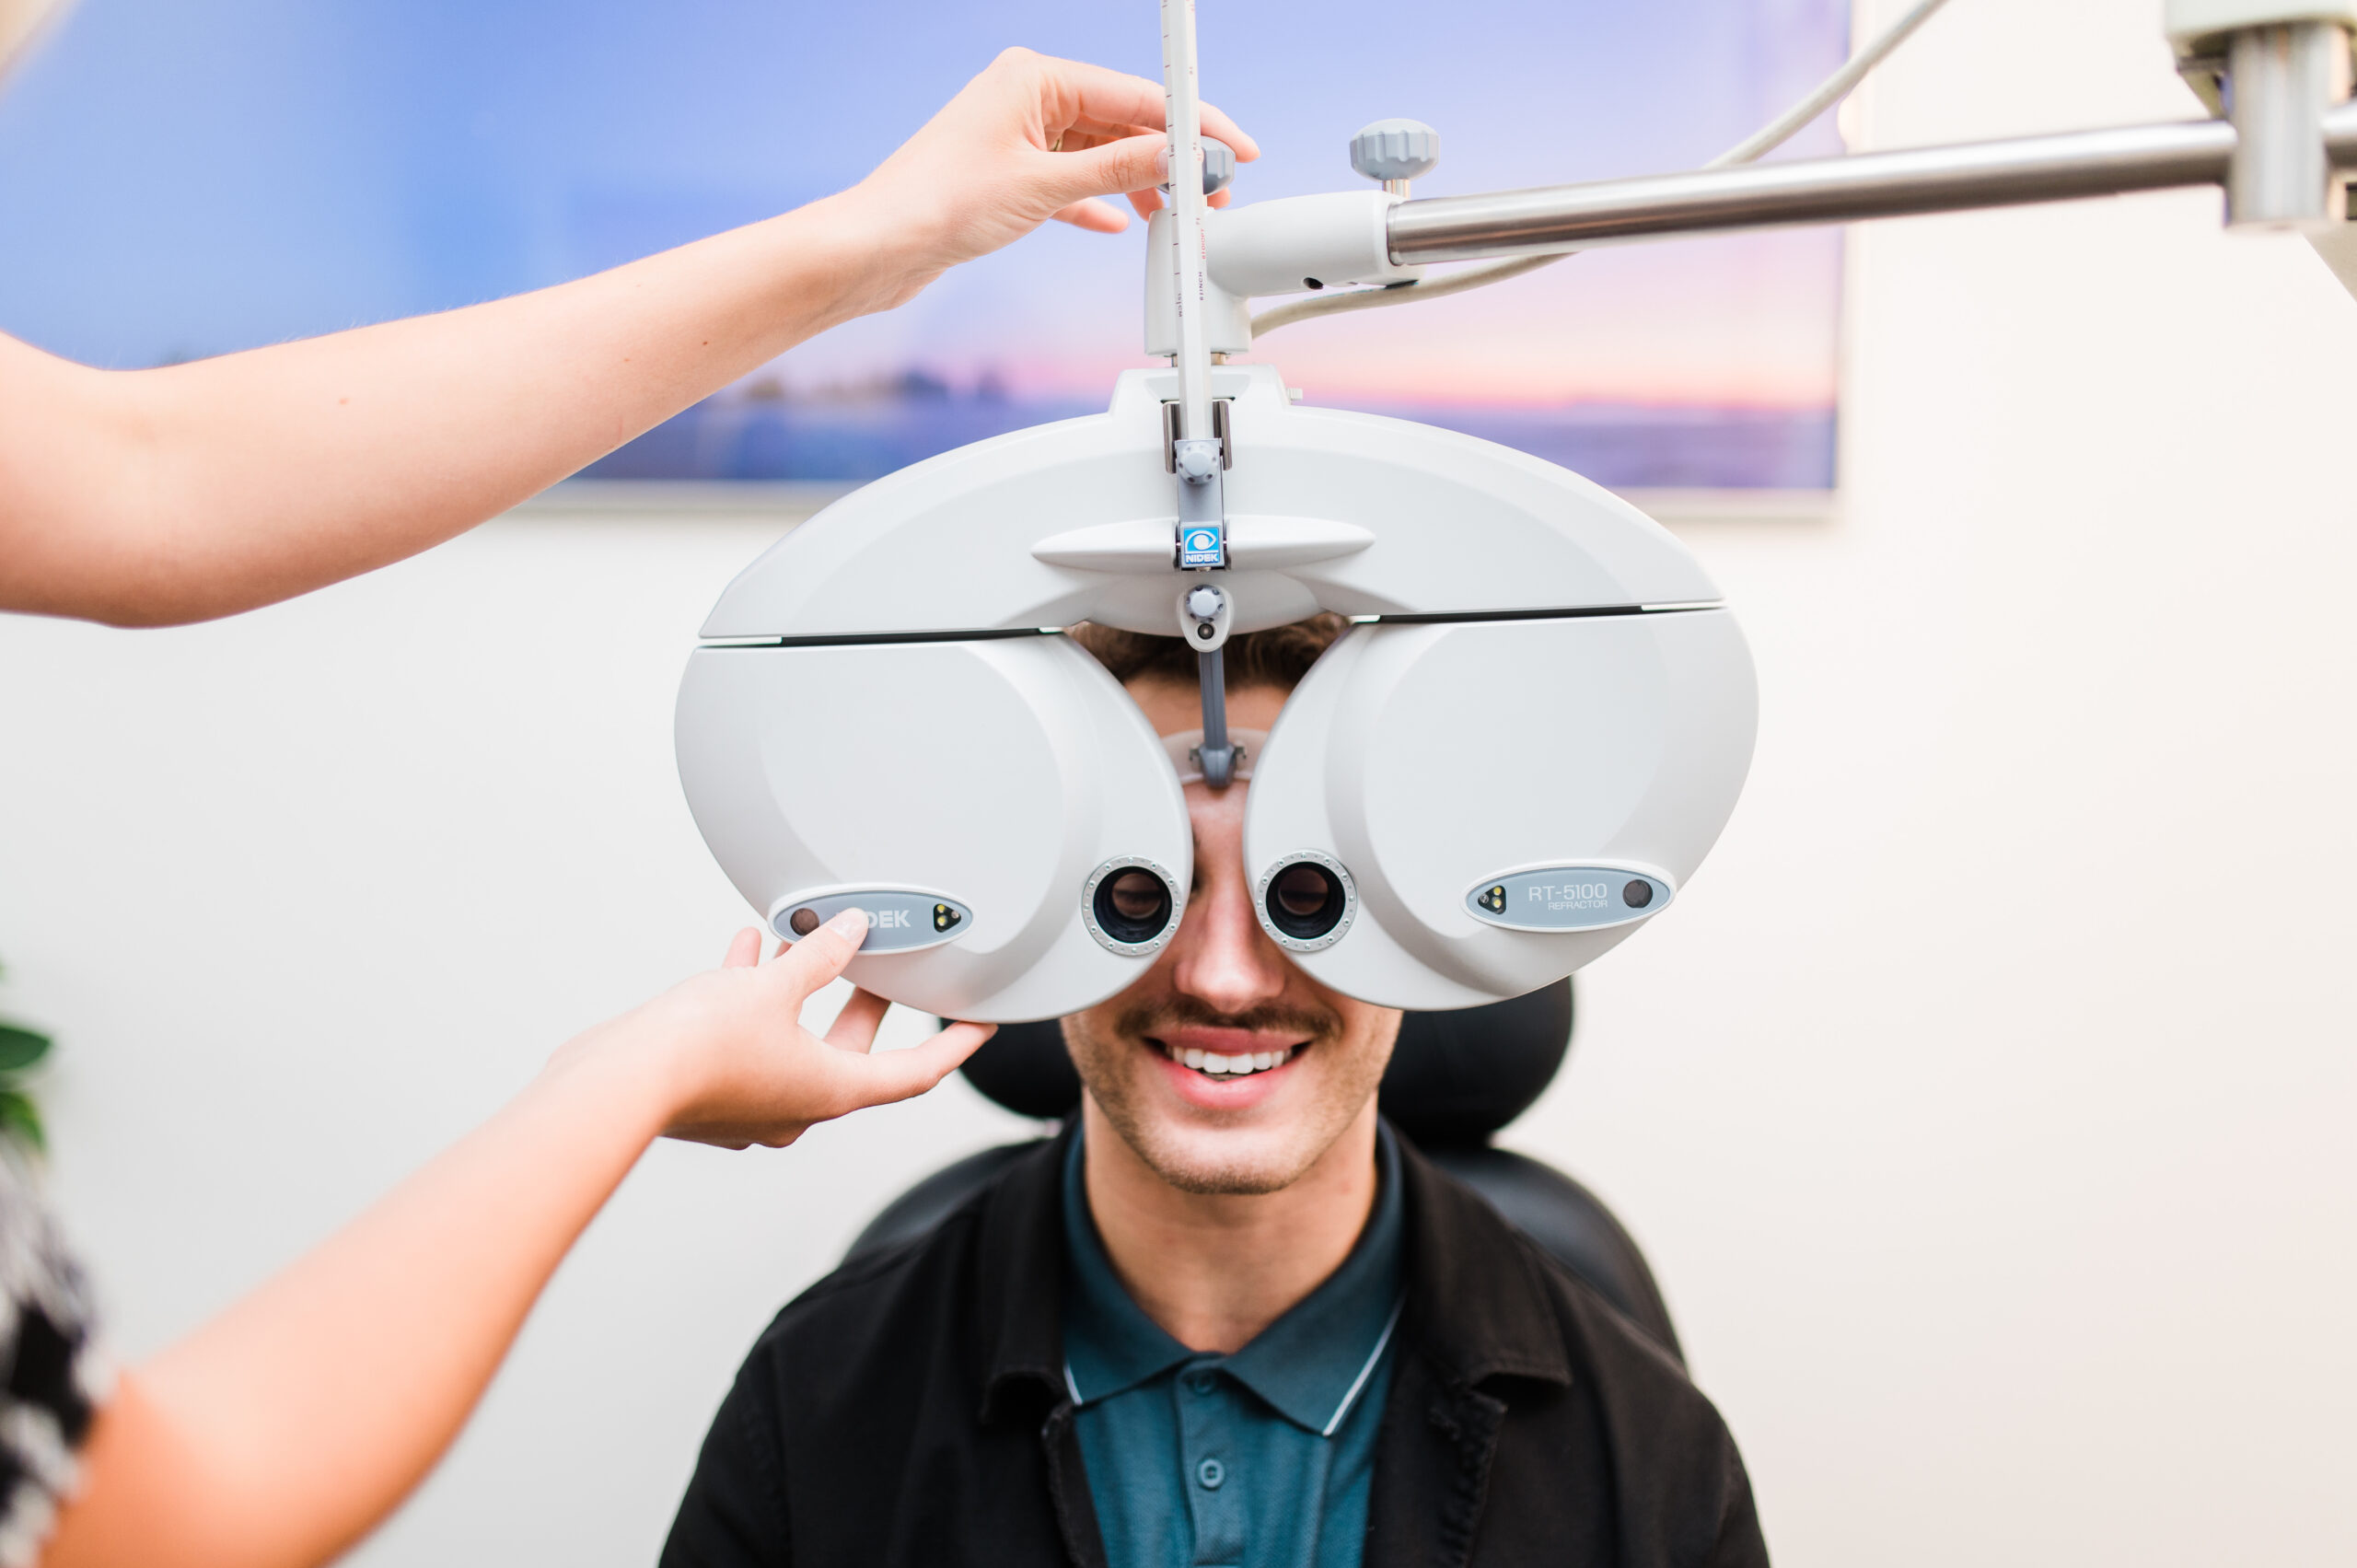 A young man shows how patients are tested for degenerative diseases in an eye care clinic